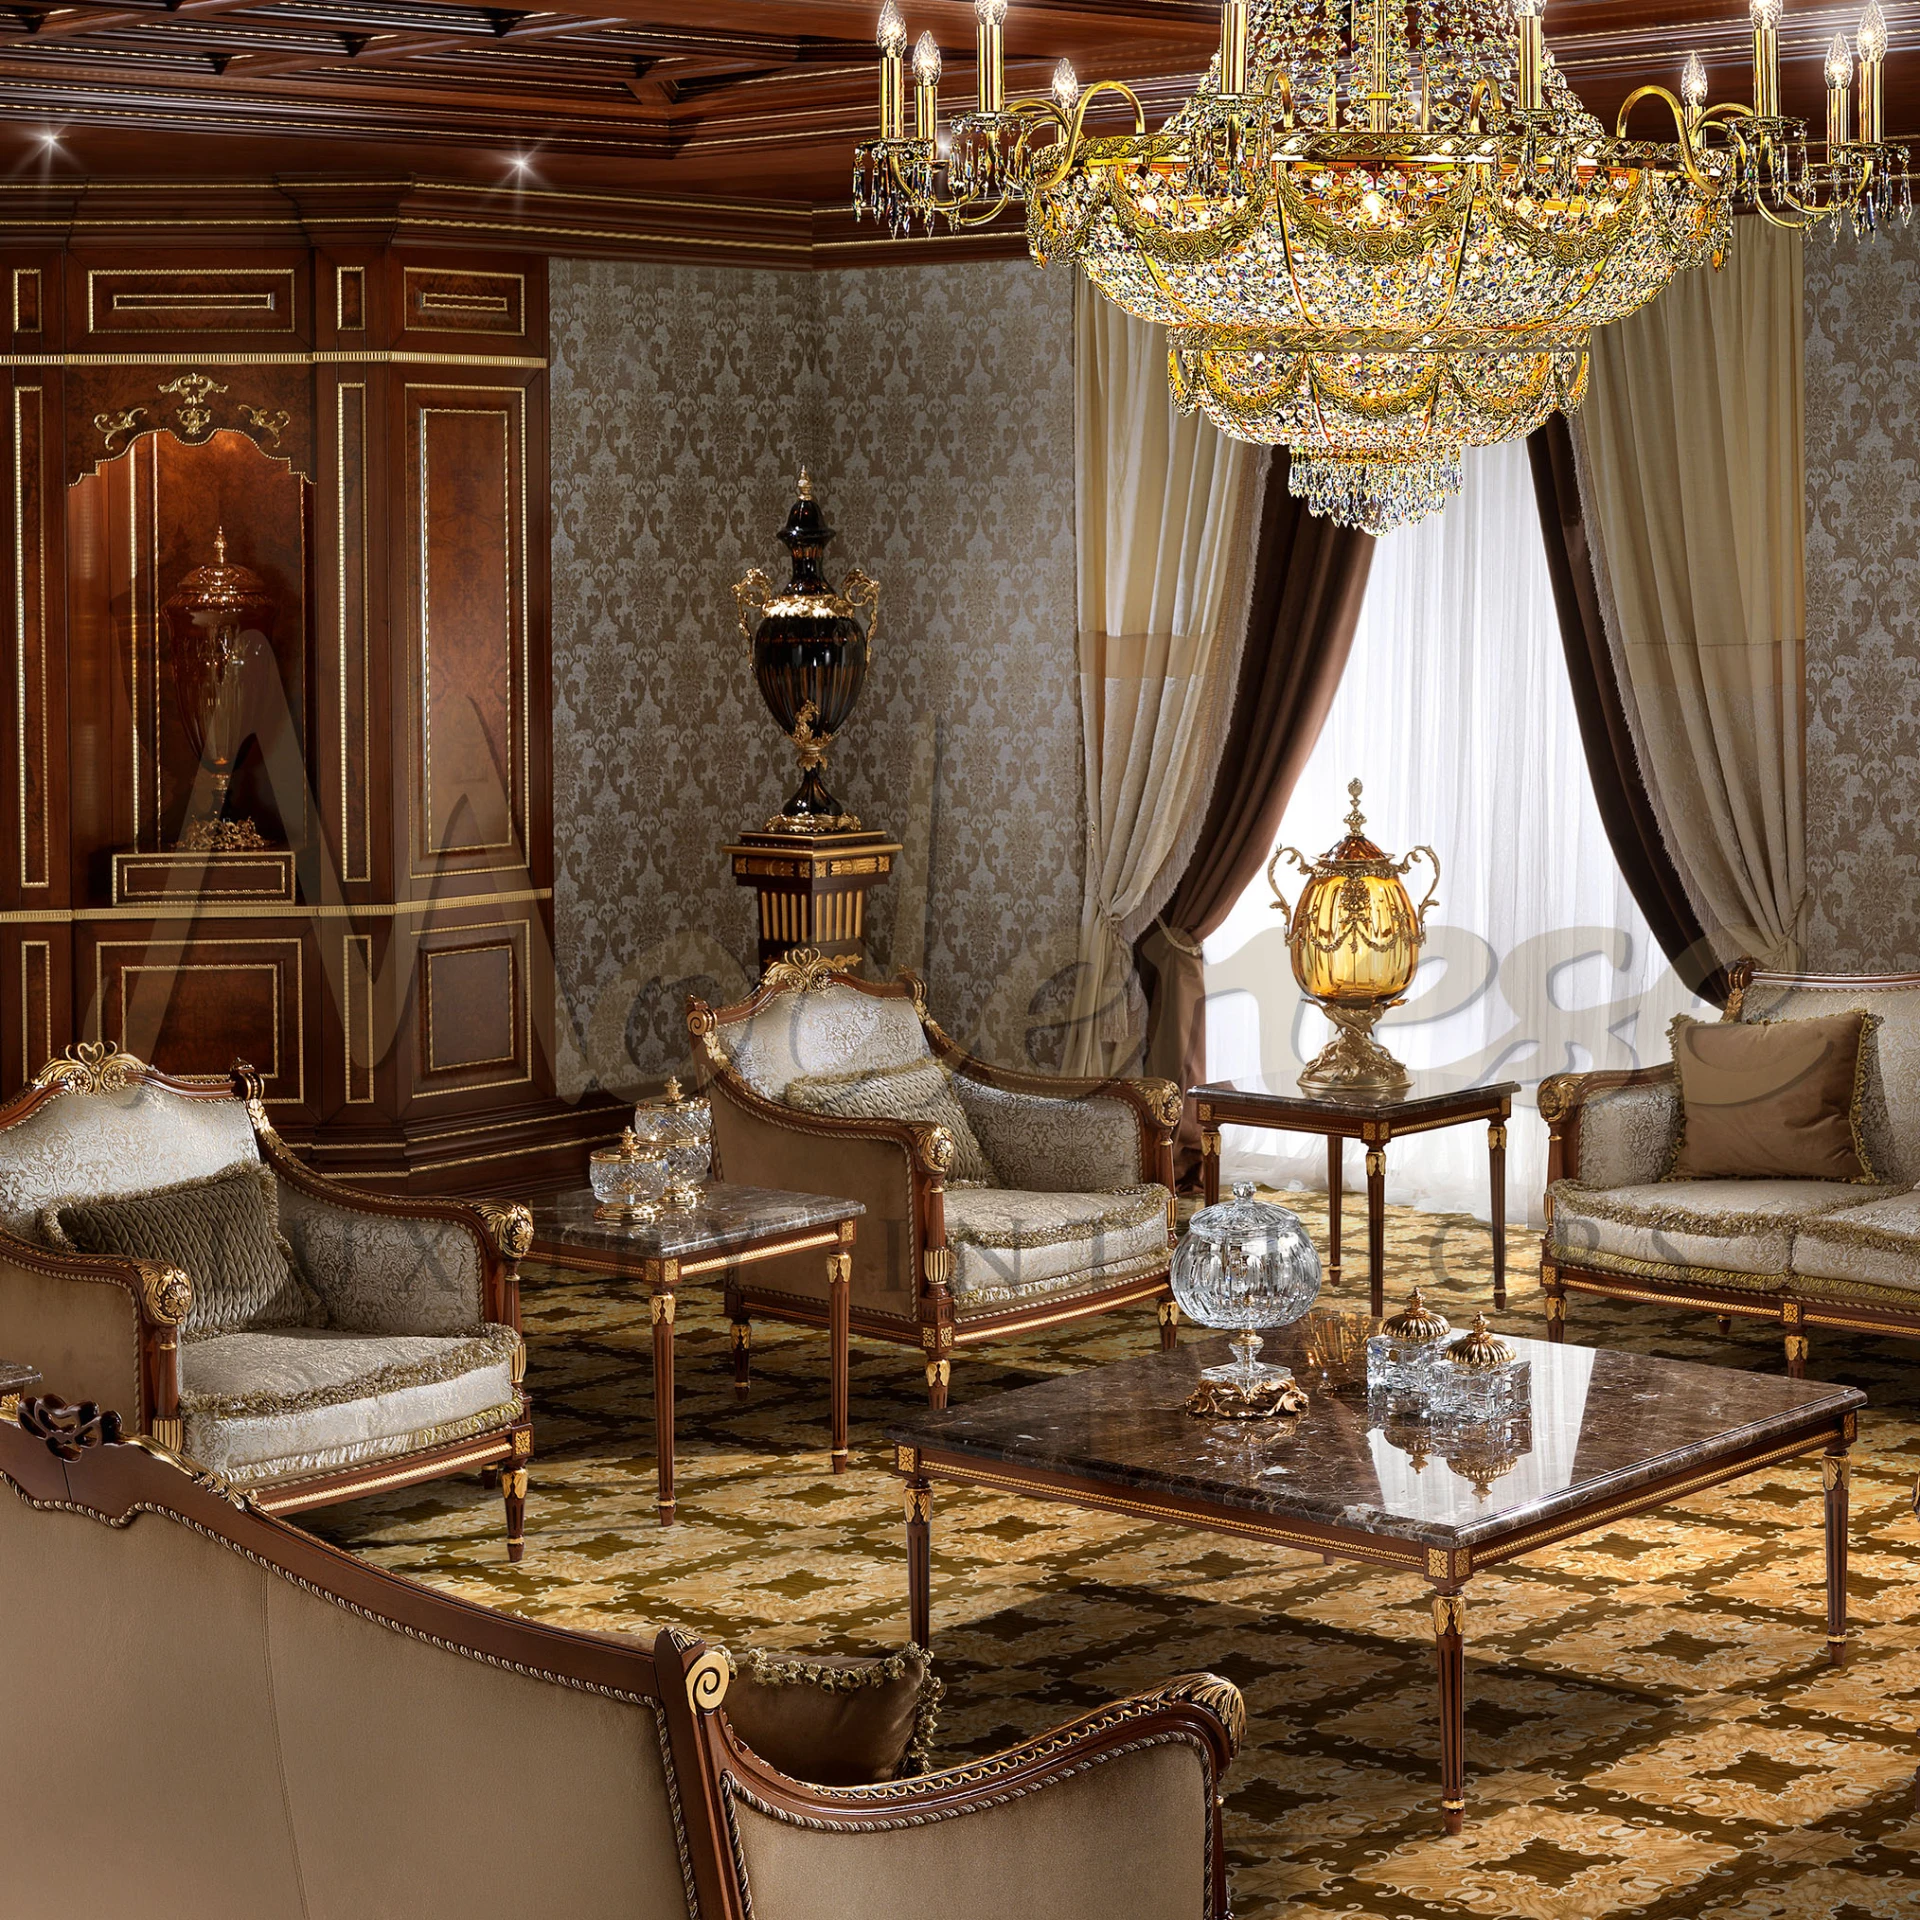 Grand taupe damask sitting room with elegant gold leaf accents and plush upholstery, embodying classical design.